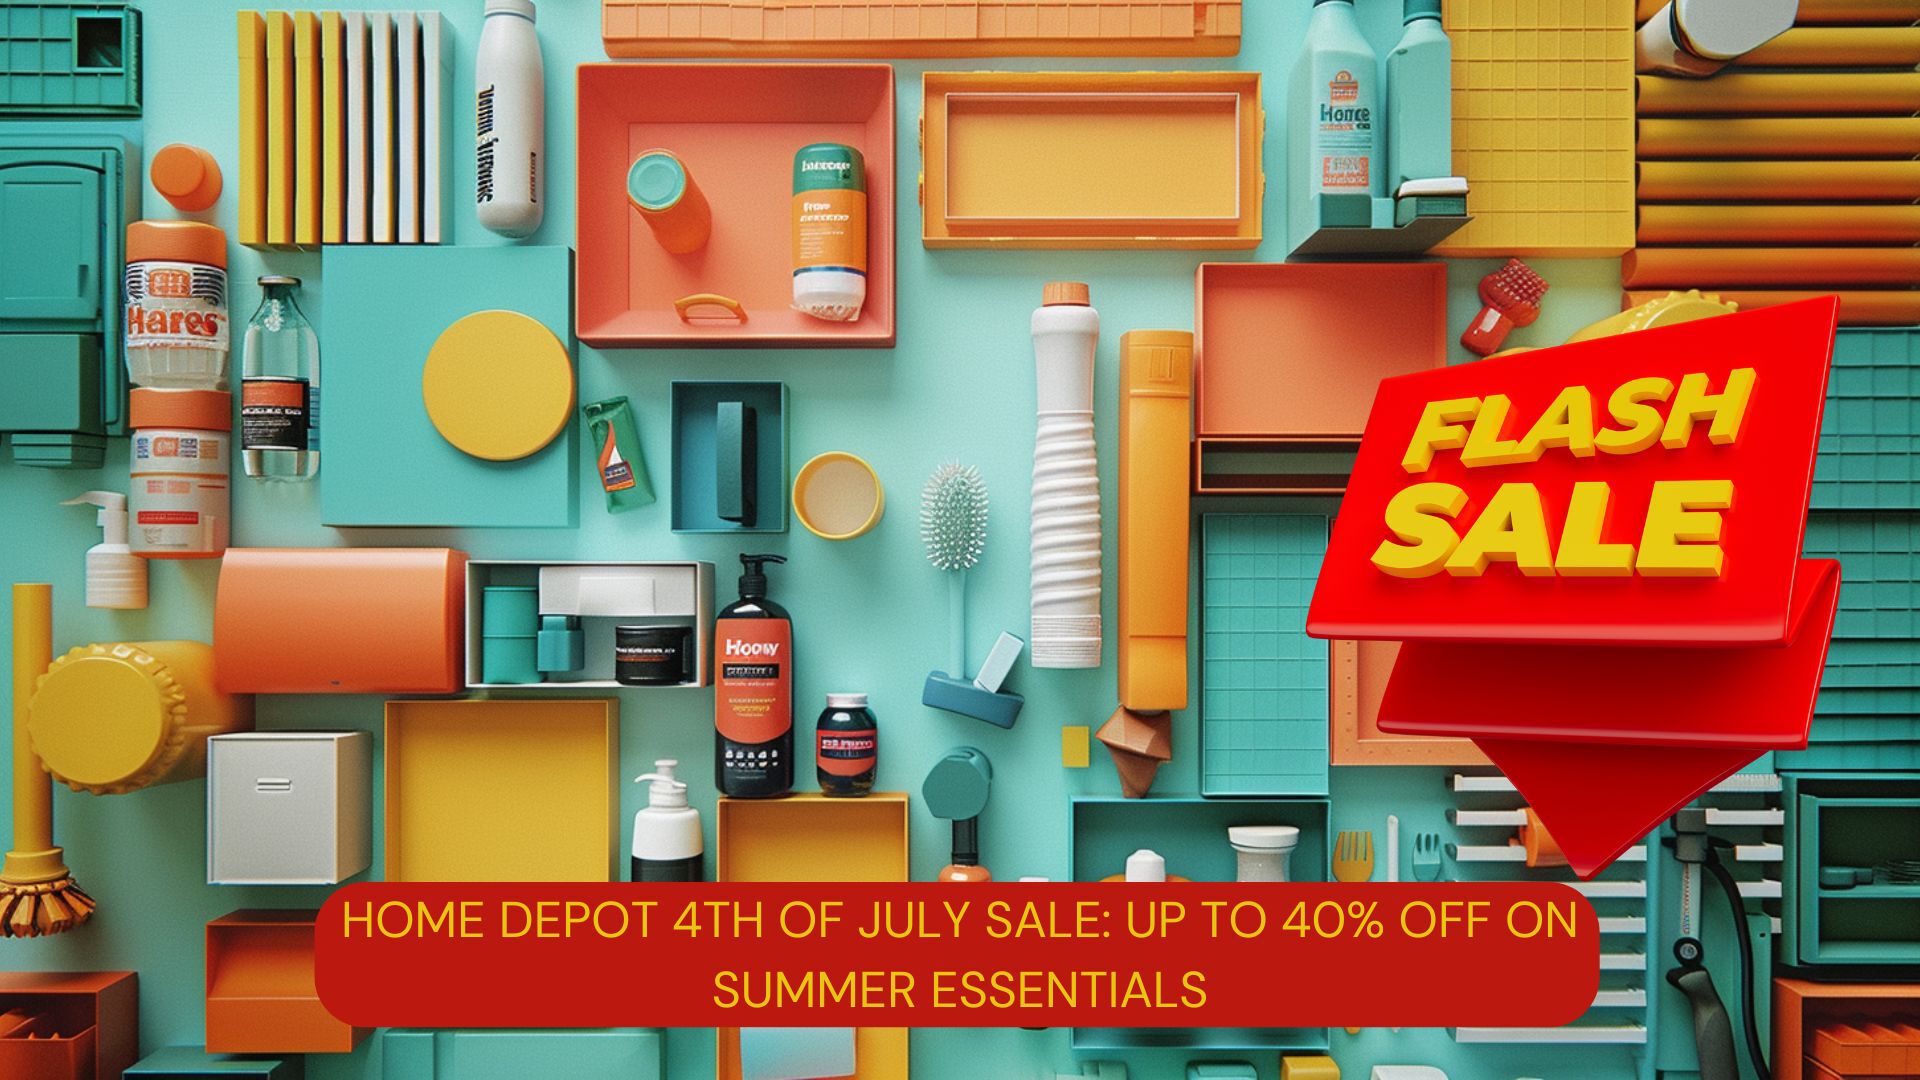 Home Depot 4th of July Sale Up to 40% off on summer essentials